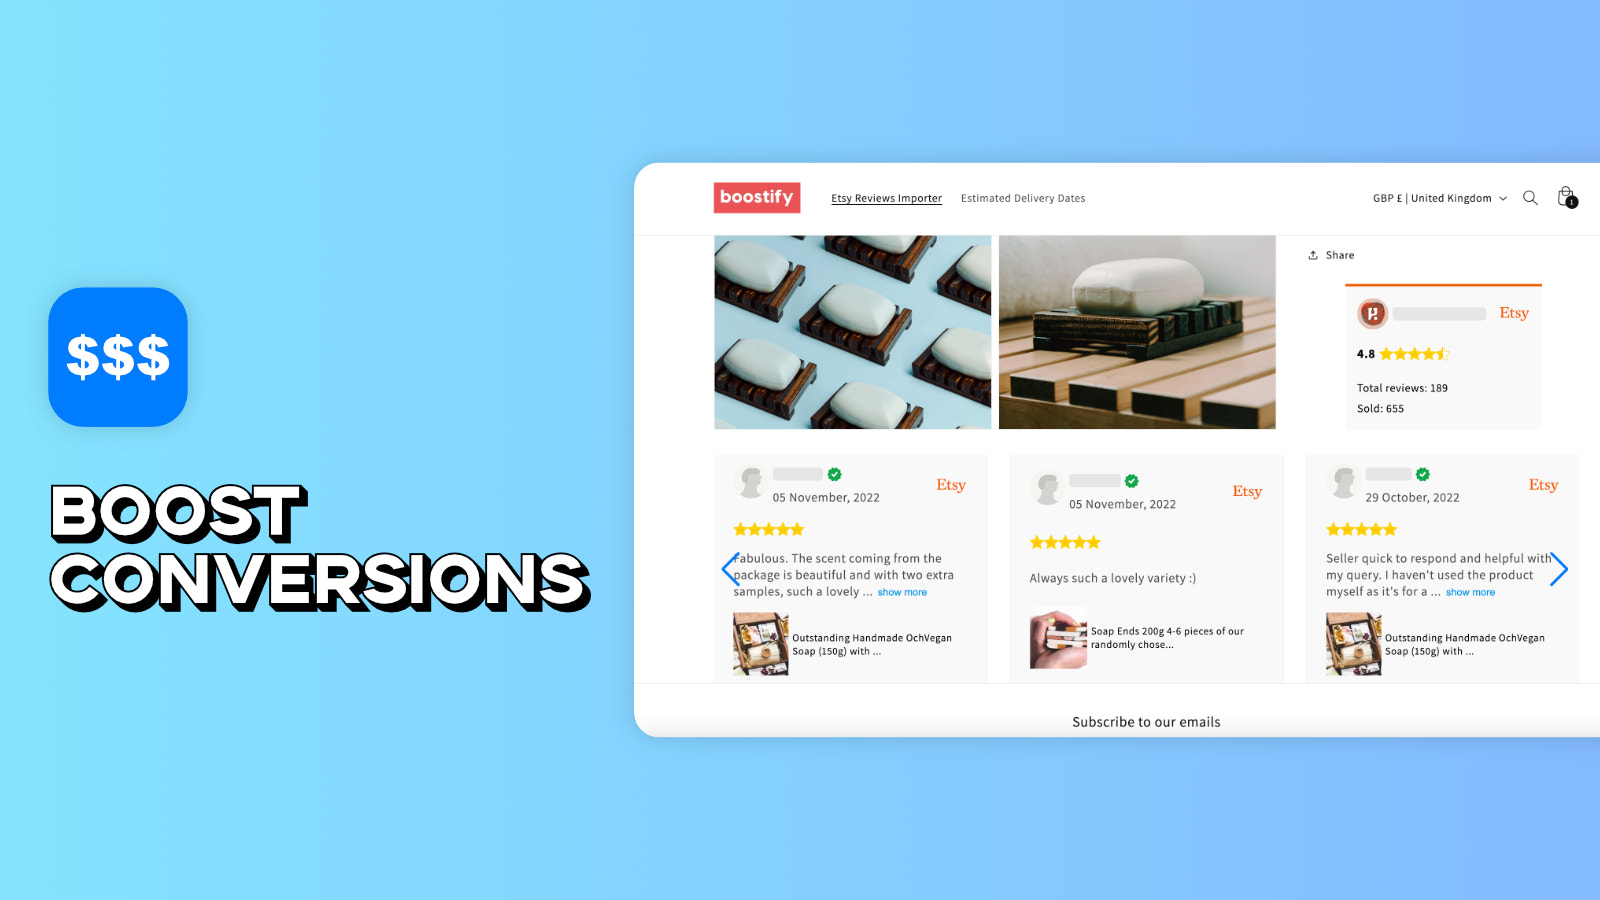 Etsy Reviews Importer - Boost Conversions